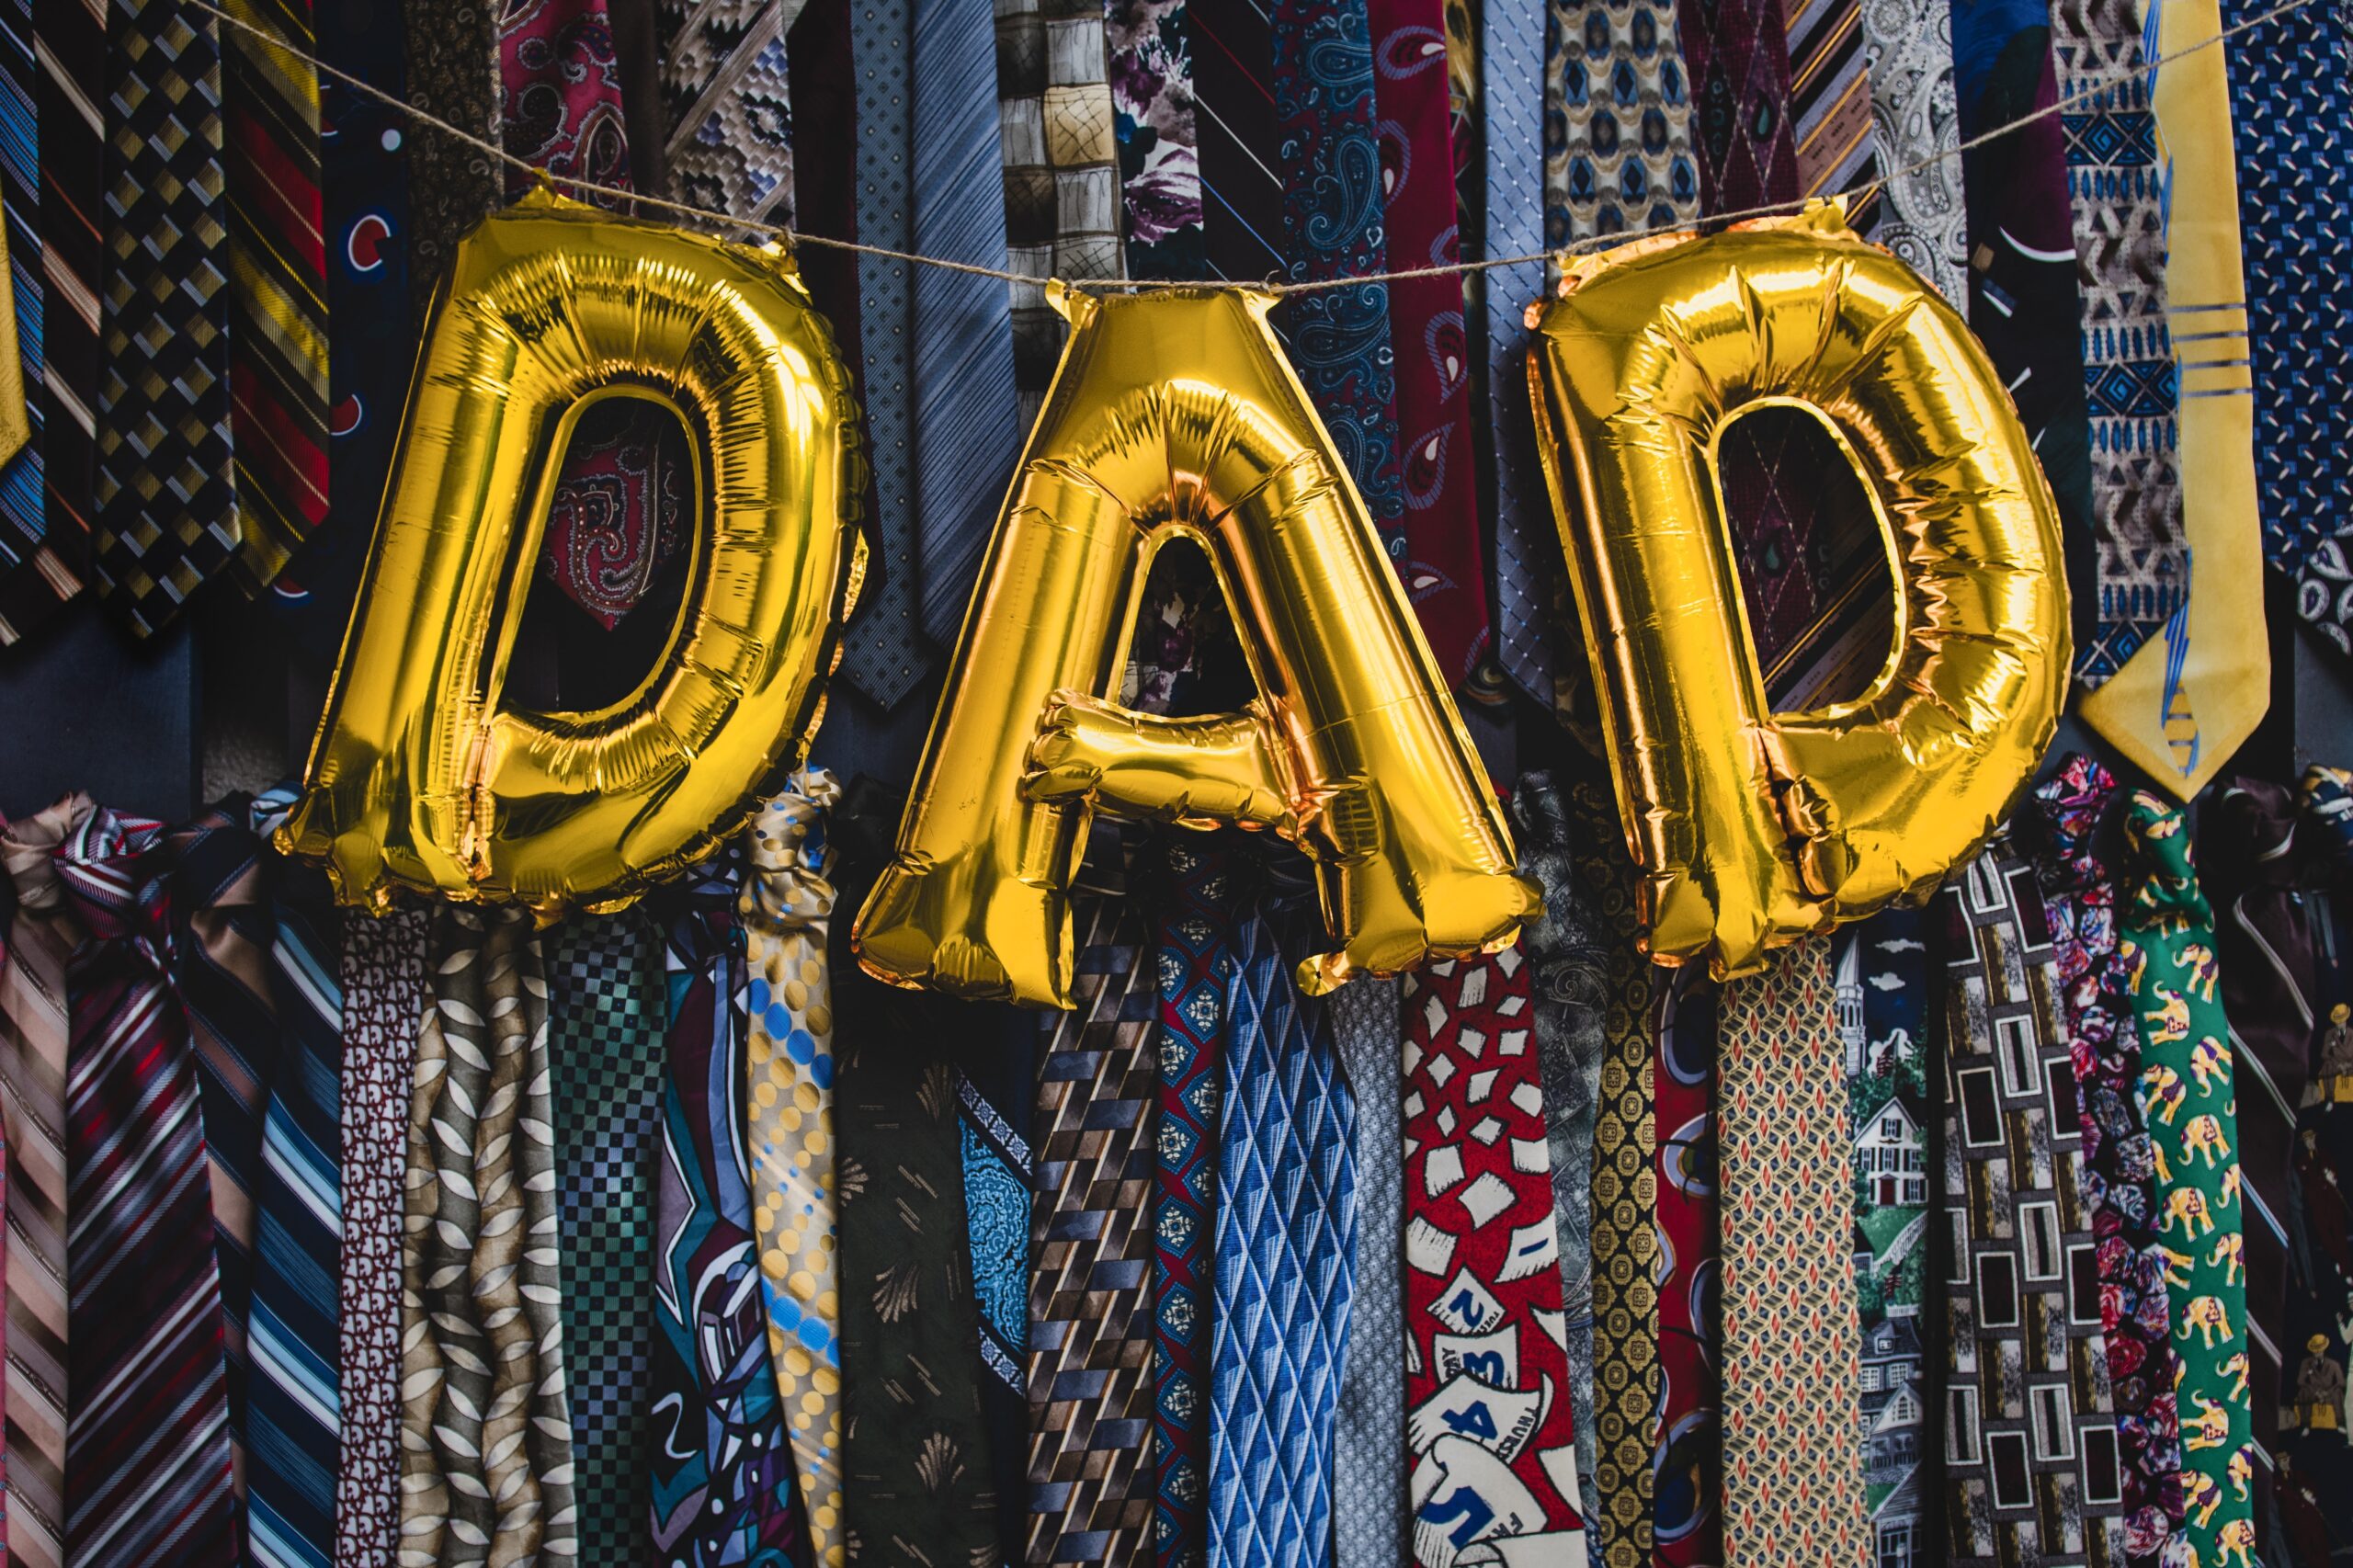 Balloons spell out DAD hang over a selection of men's ties